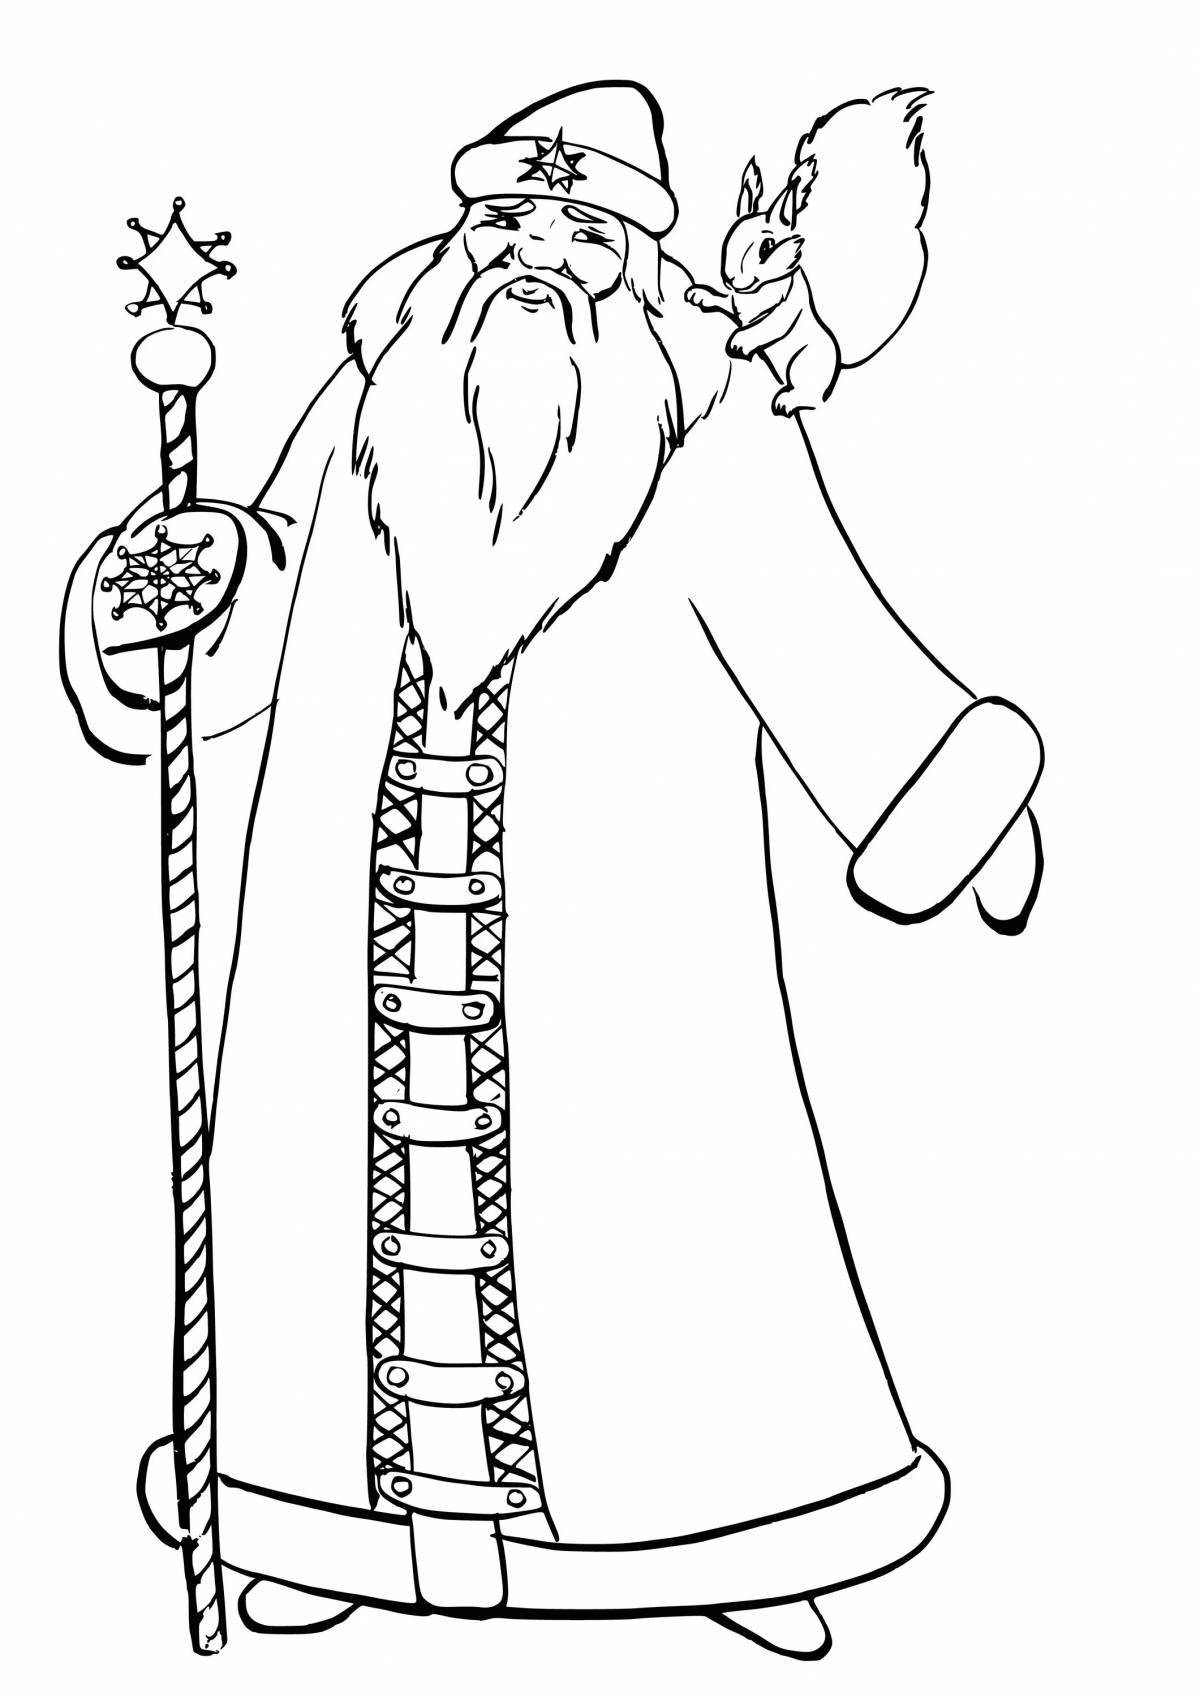 Charming governor frost coloring page